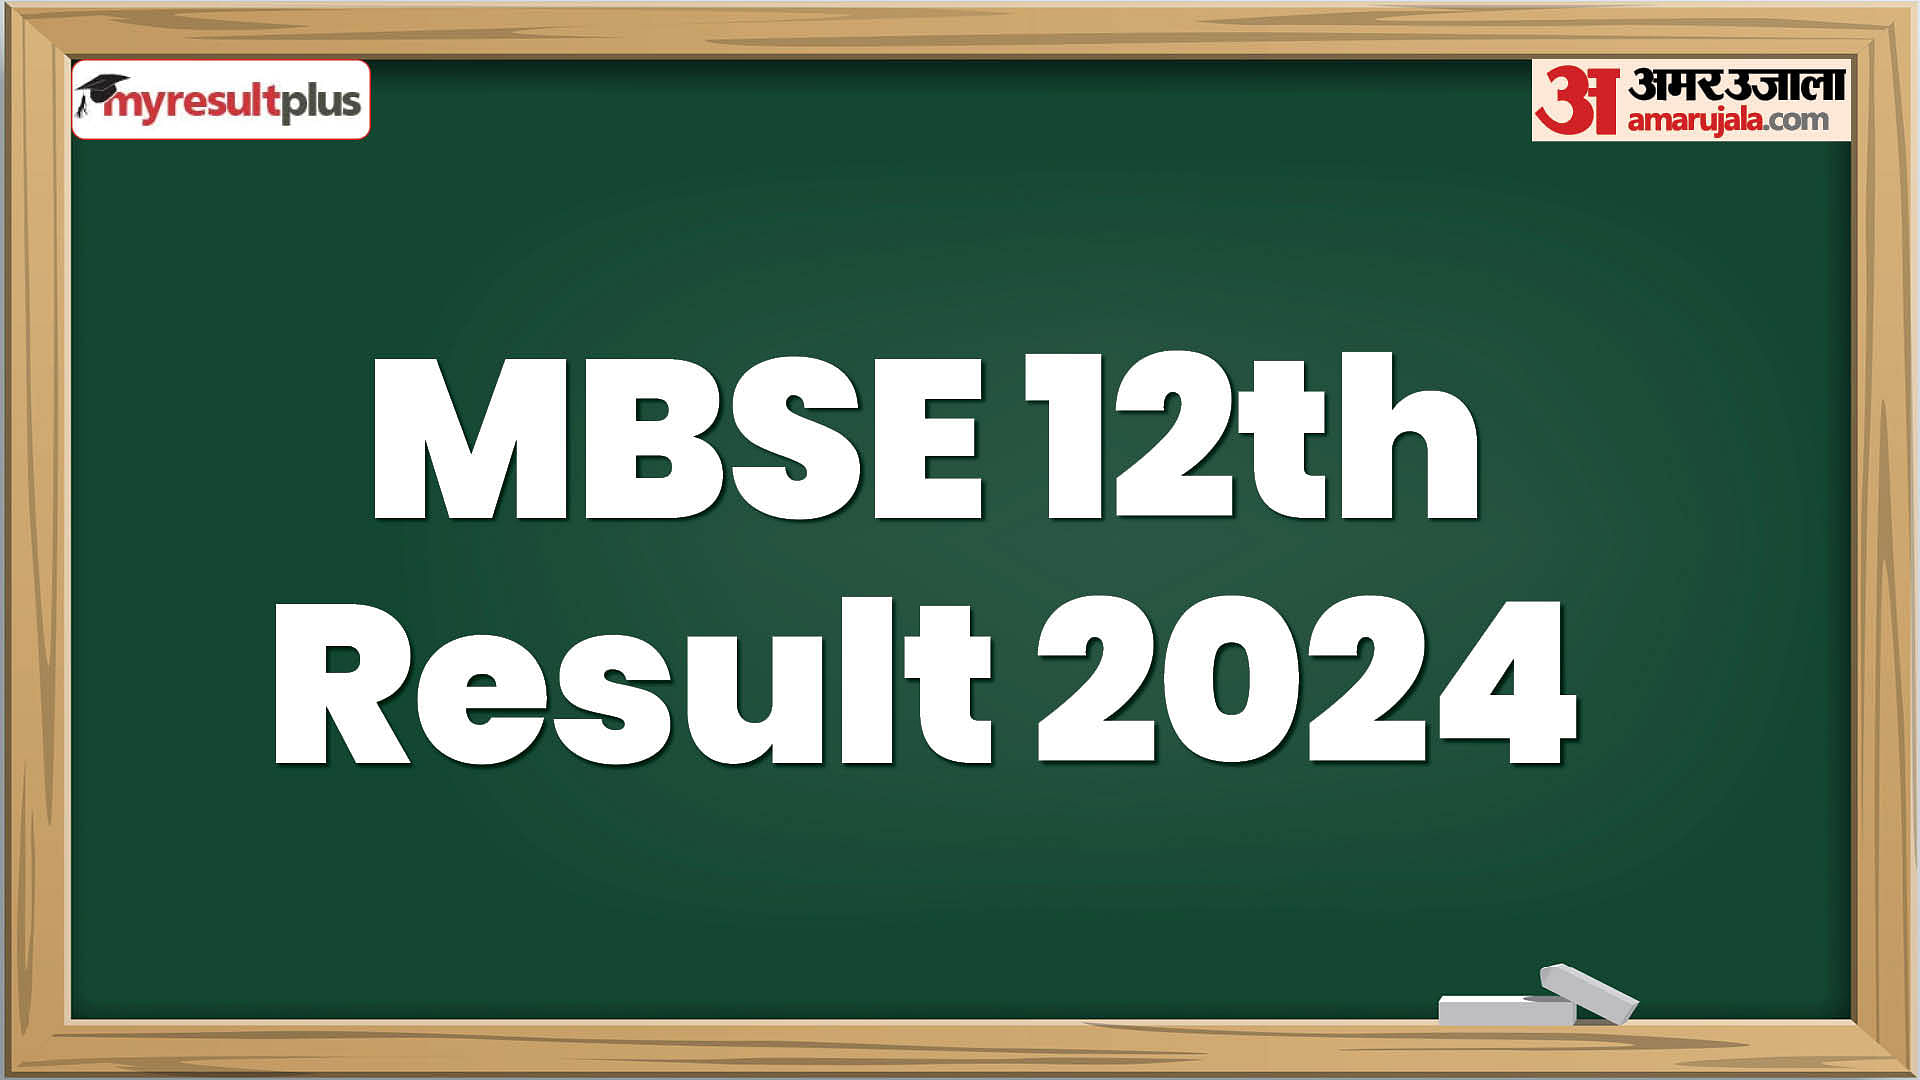 MBSE 12th Result 2024: Check releasing date and how to download, Read all details here